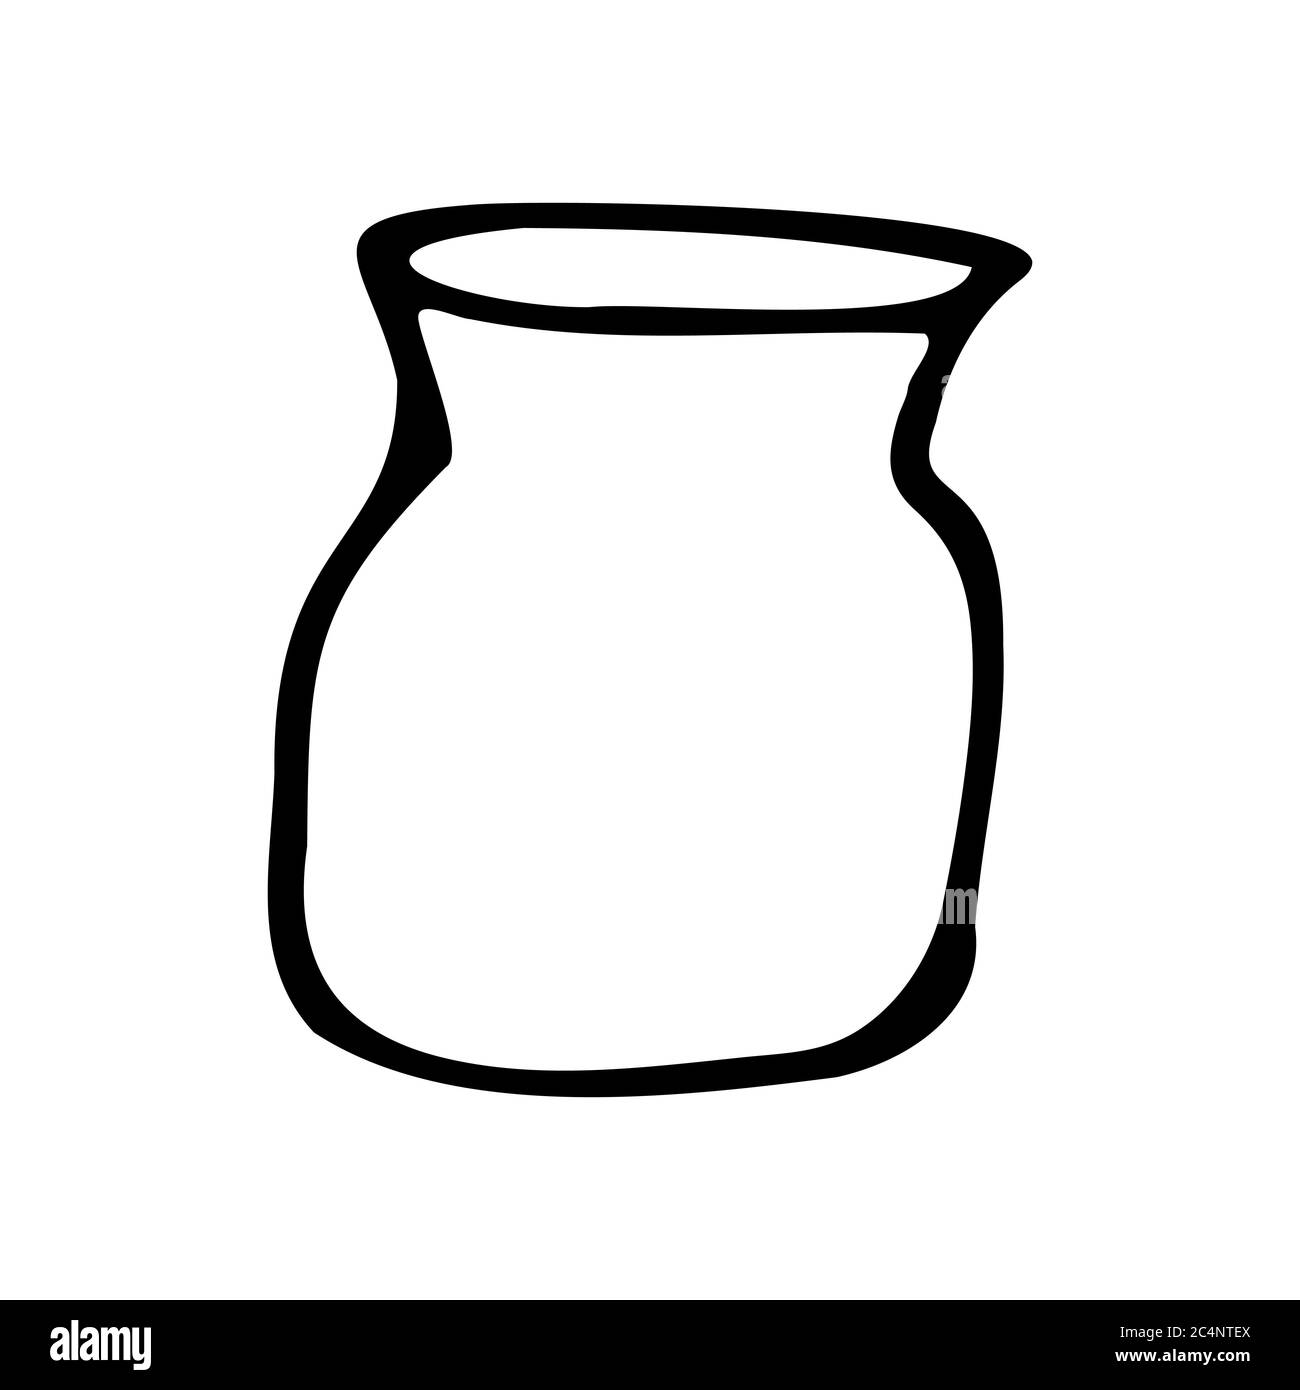 Hand drawn jar. Contour sketch. Kitchen objects doodle style. Vector illustration isolated on white background. Alchemy and vintage. Stock Vector